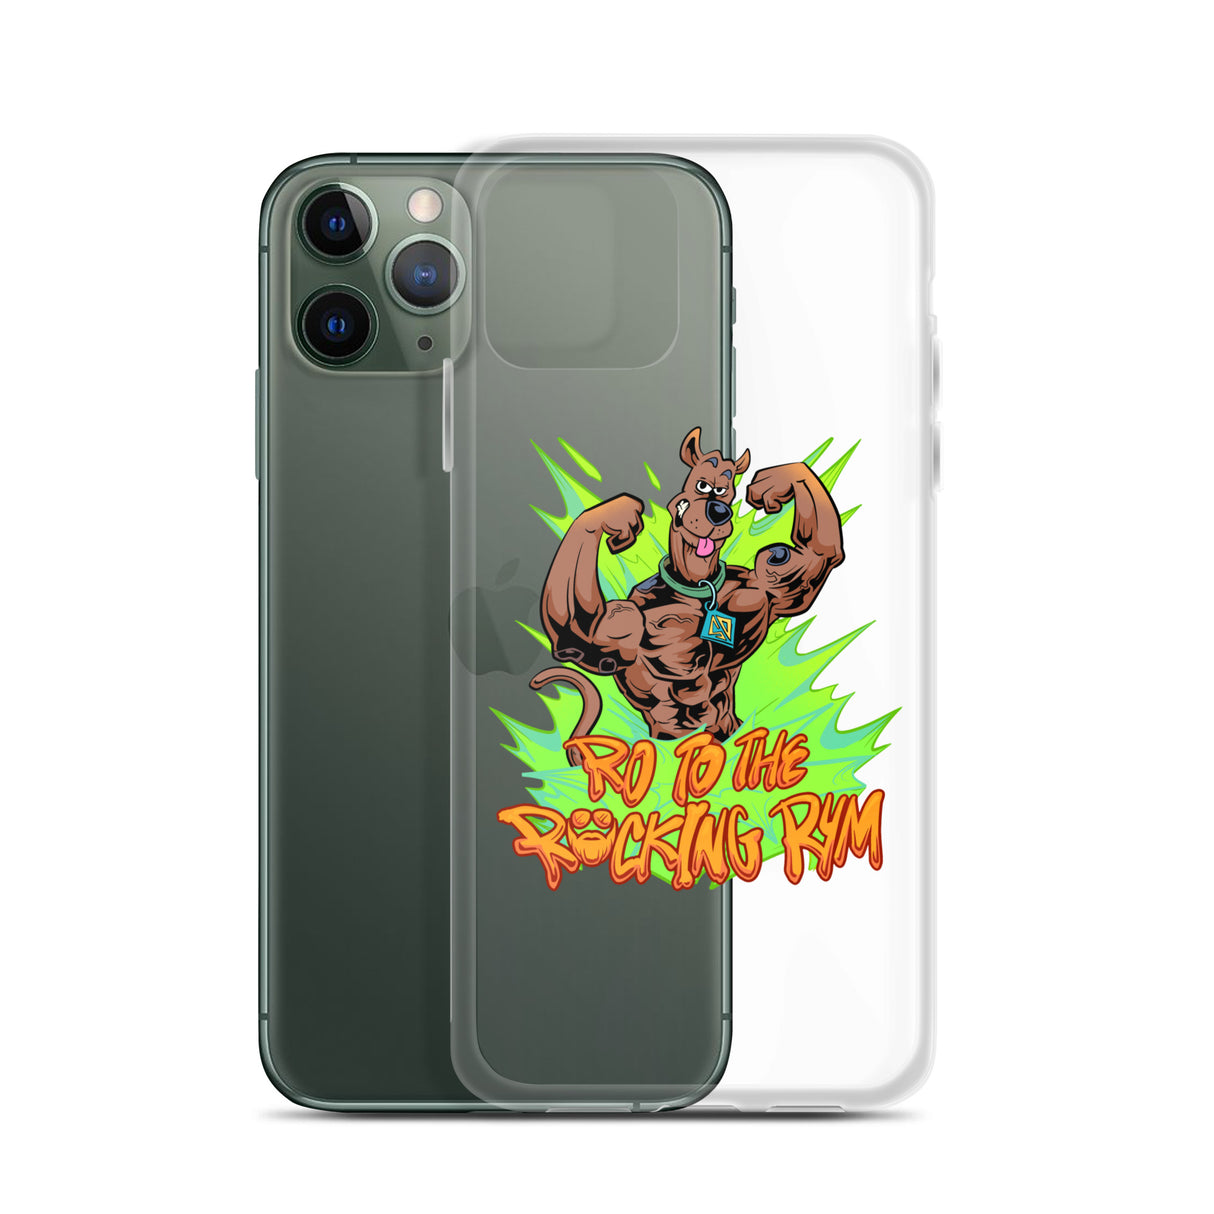 Scooby iPhone Case